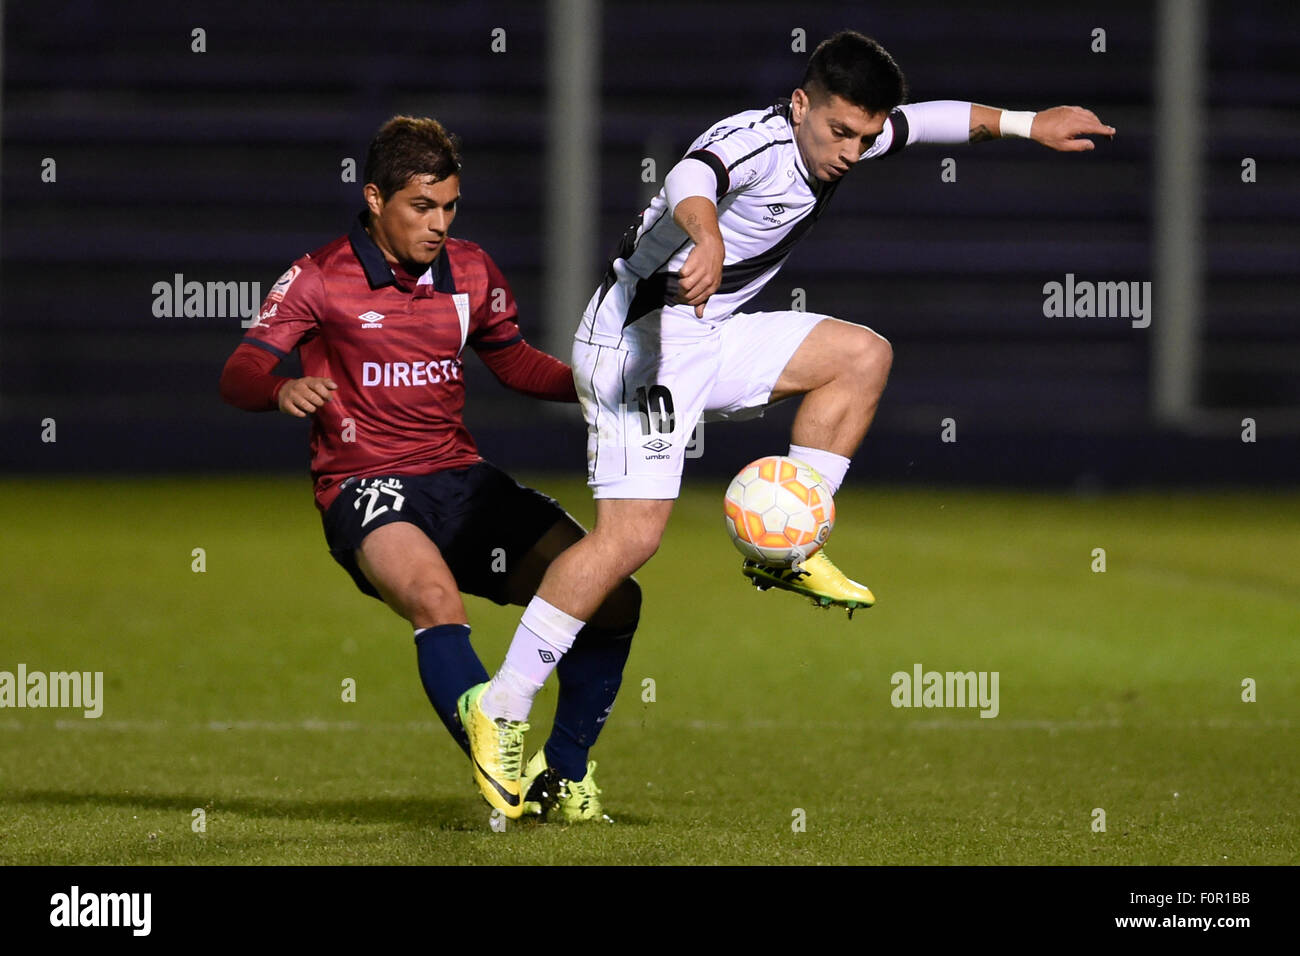 Montevideo, Uruguay. 19th Aug, 2015. Ignacio Gonzalez (R) of Uruguay's Danubio vies for the ball with Juan Carlos Espinoza (L) of Chile's Universidad Catolica, during their second-leg match of the first phase of the South American Cup, held at Luis Franzini Stadium in Montevideo, capital of Uruguay, on Aug. 19, 2015. Danubio lost by a score of 1-2. Credit:  Nicolas Celaya/Xinhua/Alamy Live News Stock Photo